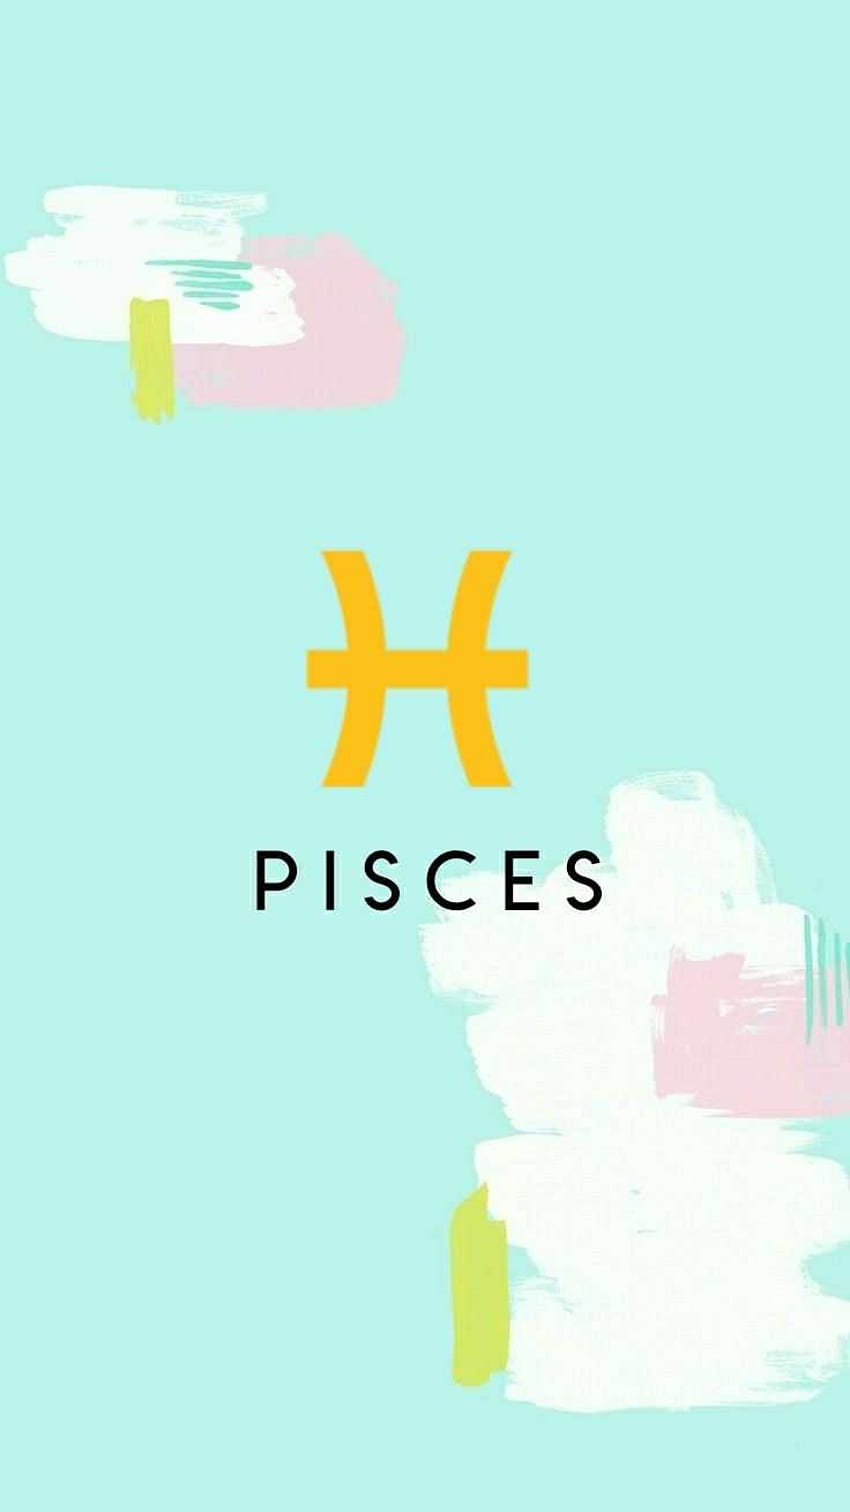 The pisces logo with a colorful background - Pisces